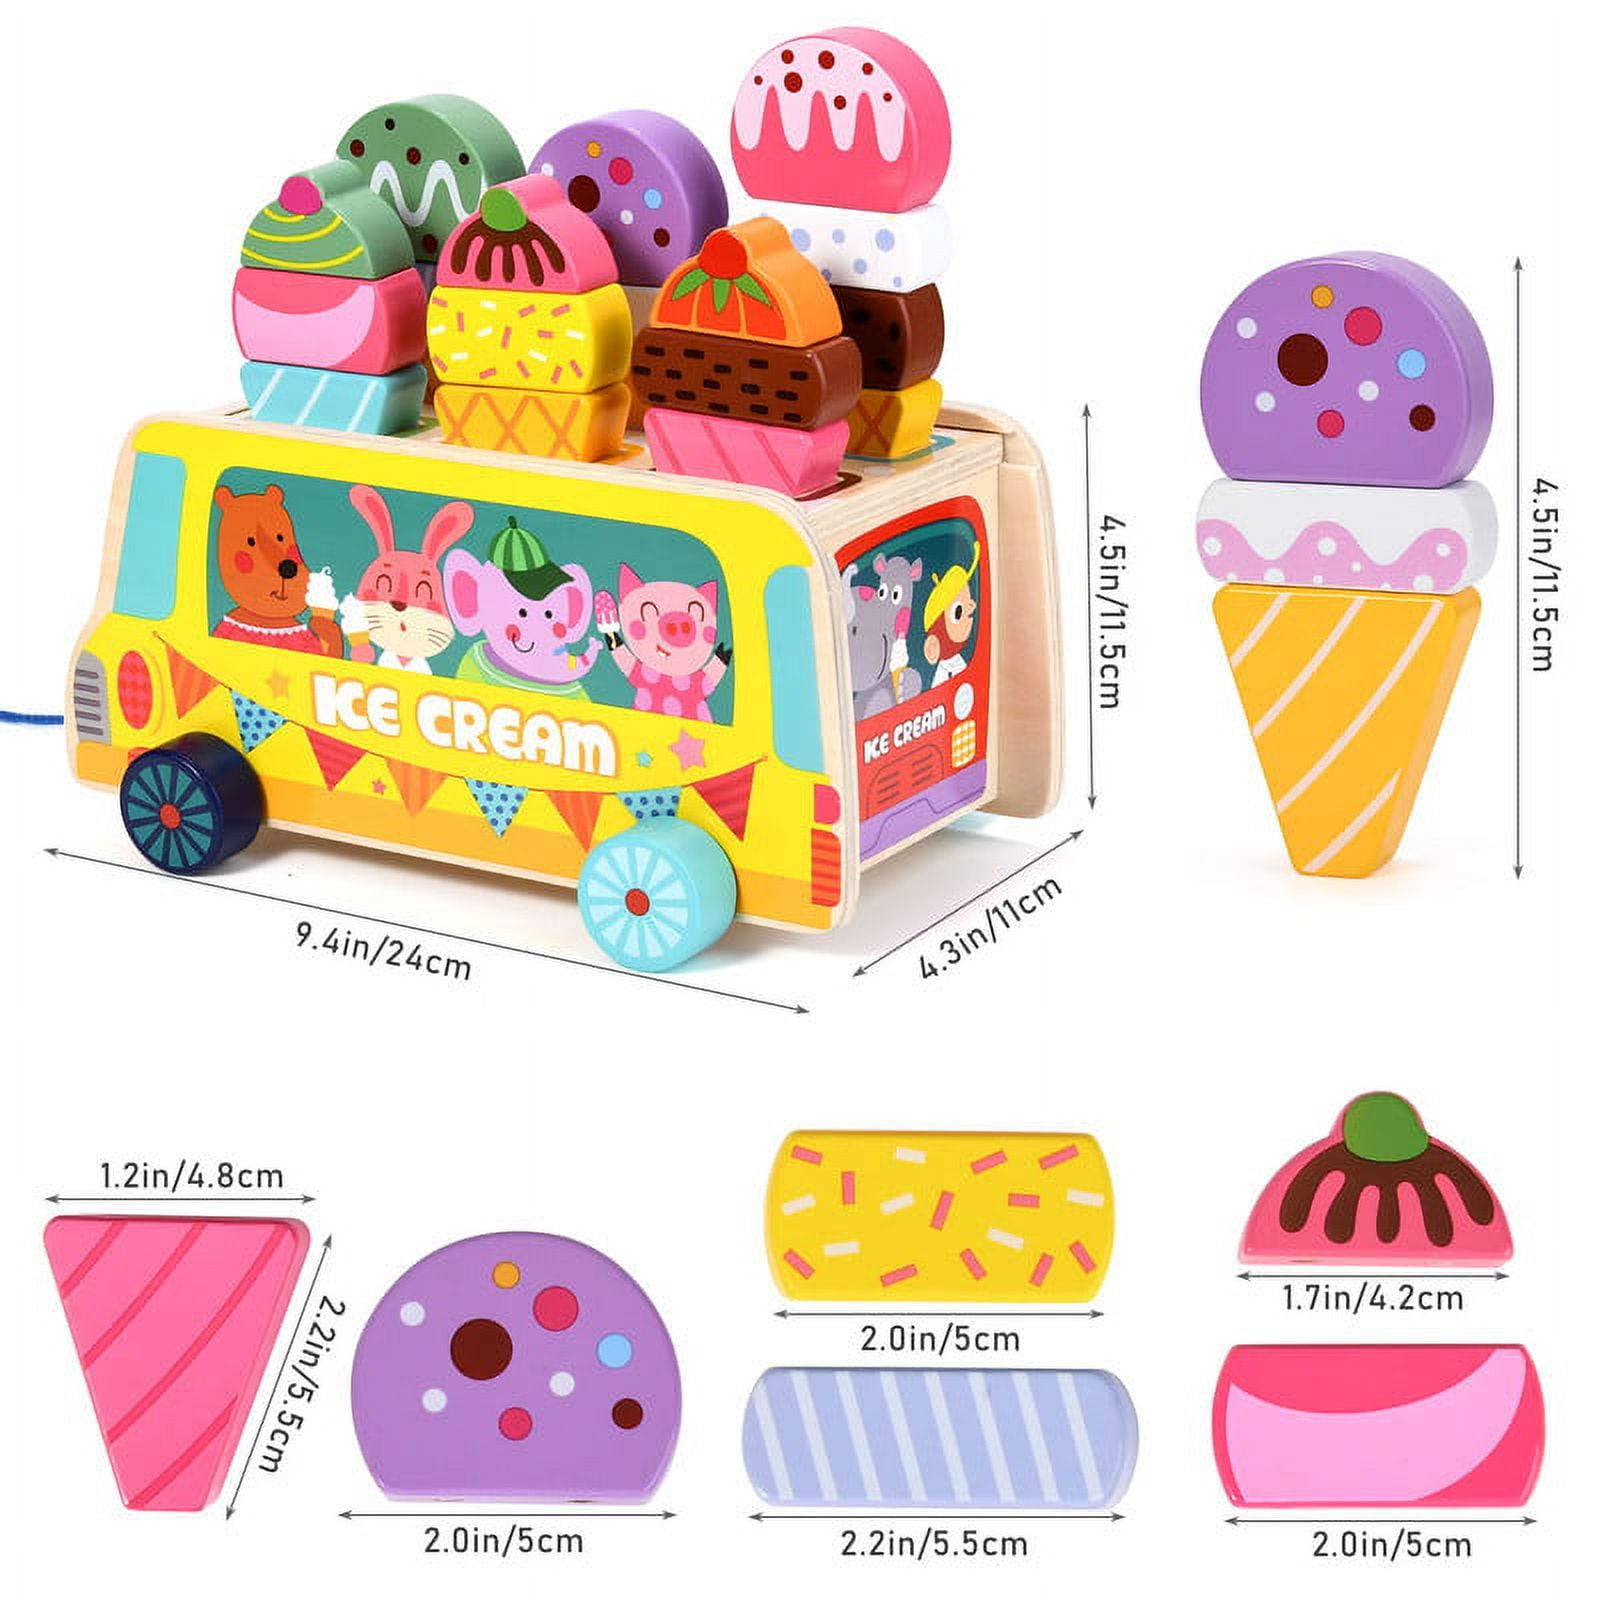 Miscool Wood Ice Cream Cart Toy Playset for Toddlers, Gift for